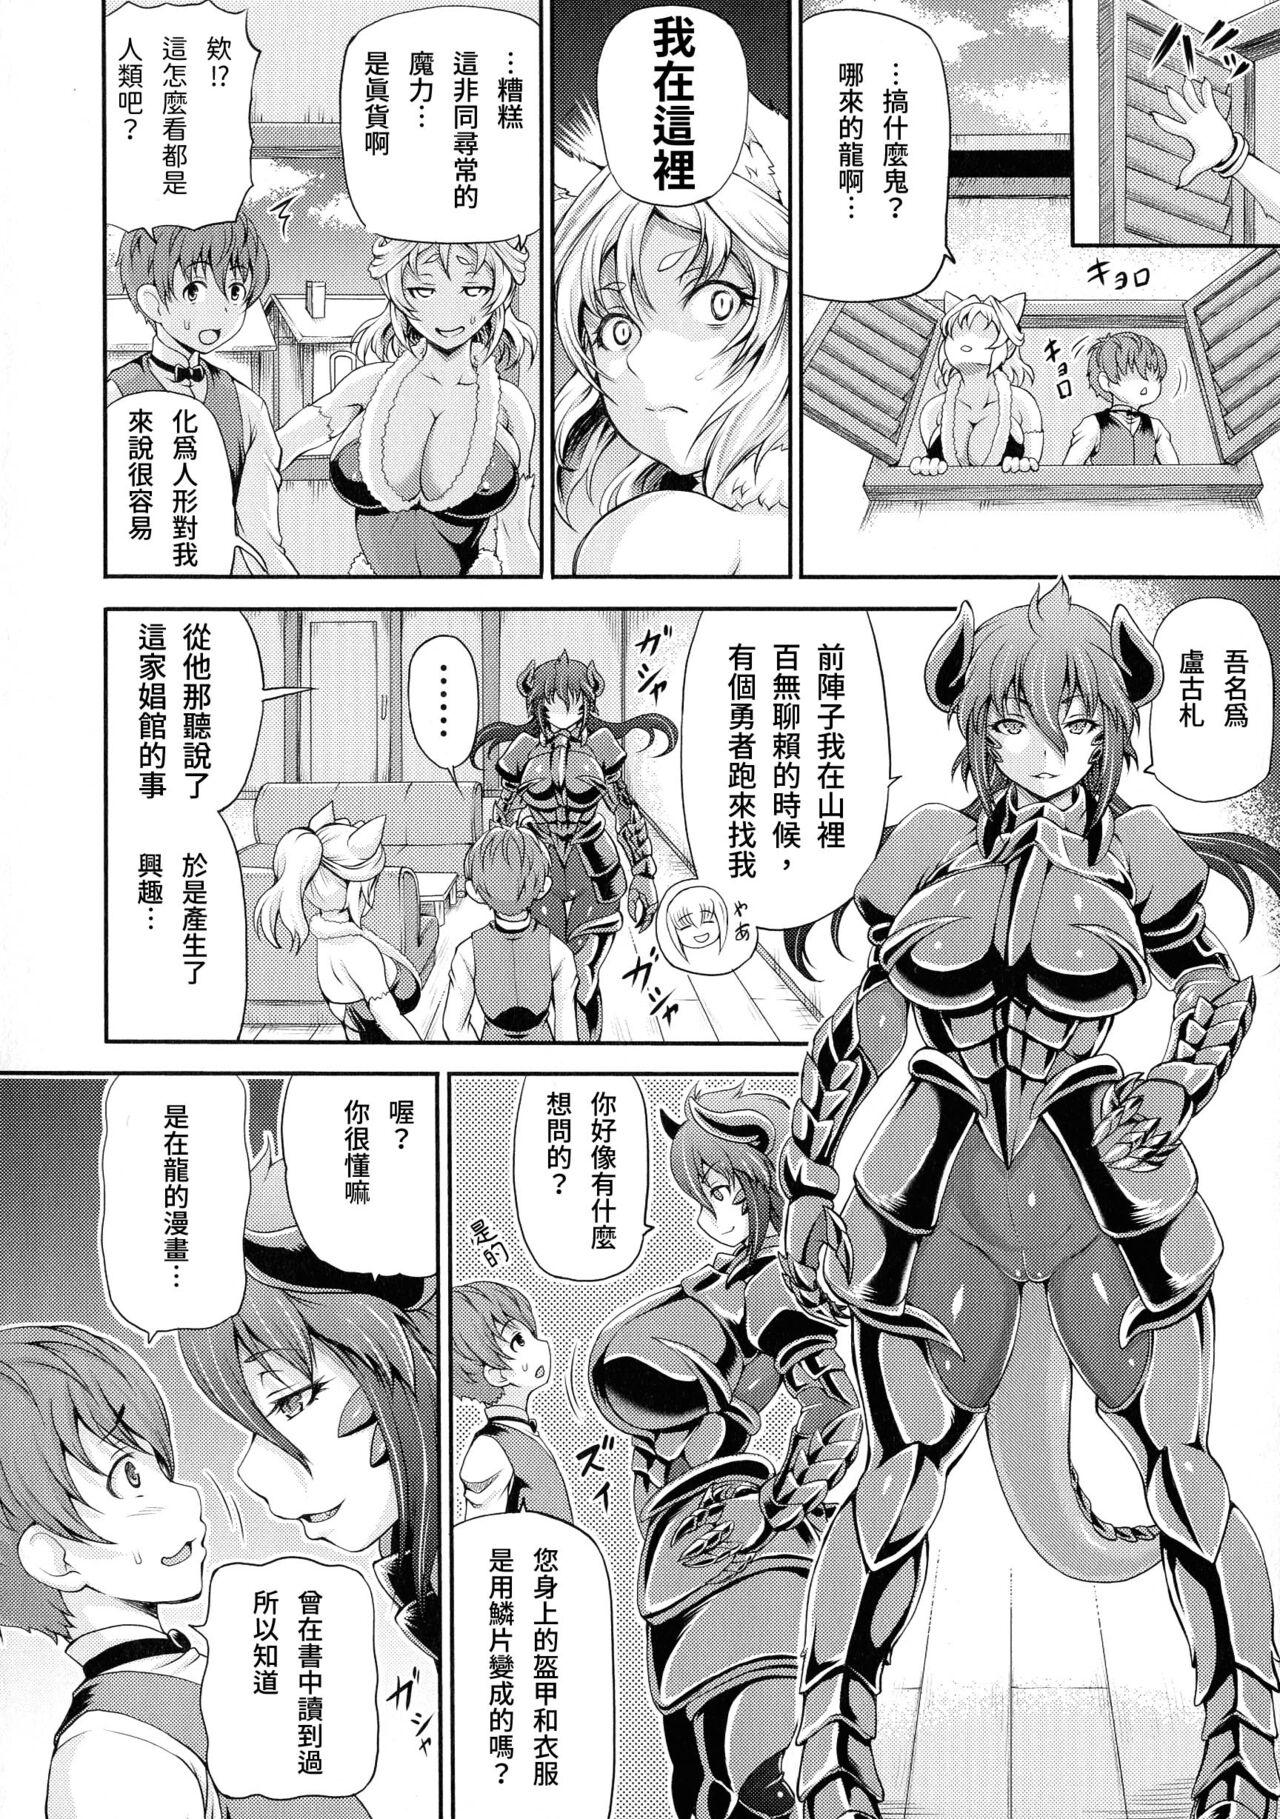 Gaygroup Isekai Shoukan 2 Ch. 1-3 Bus - Page 6